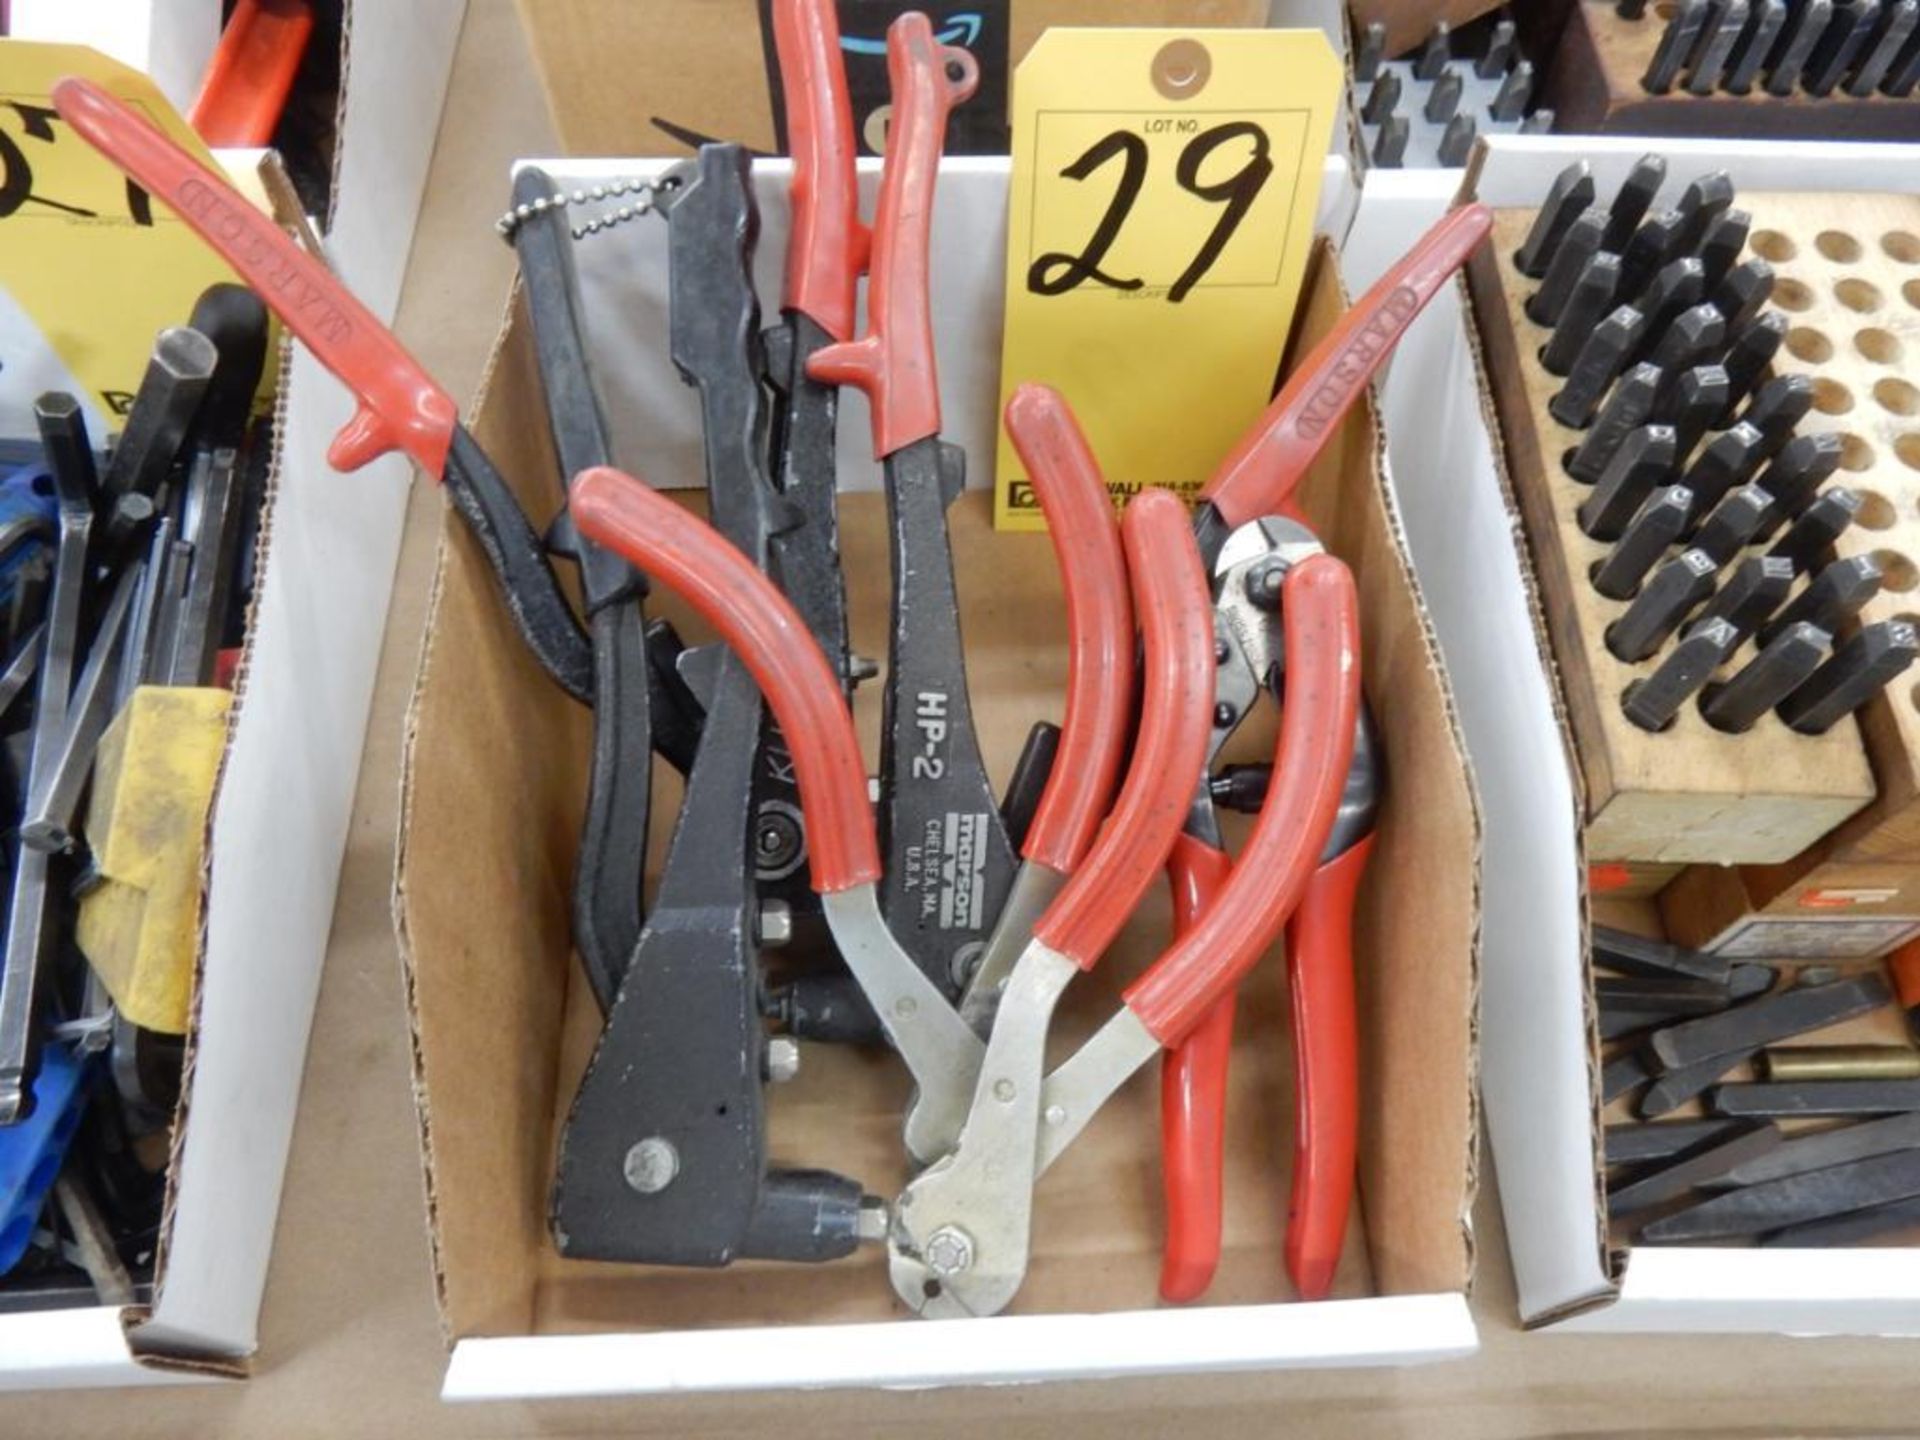 LOT MISC. WIRE CUTTERS & RIVET TOOLS